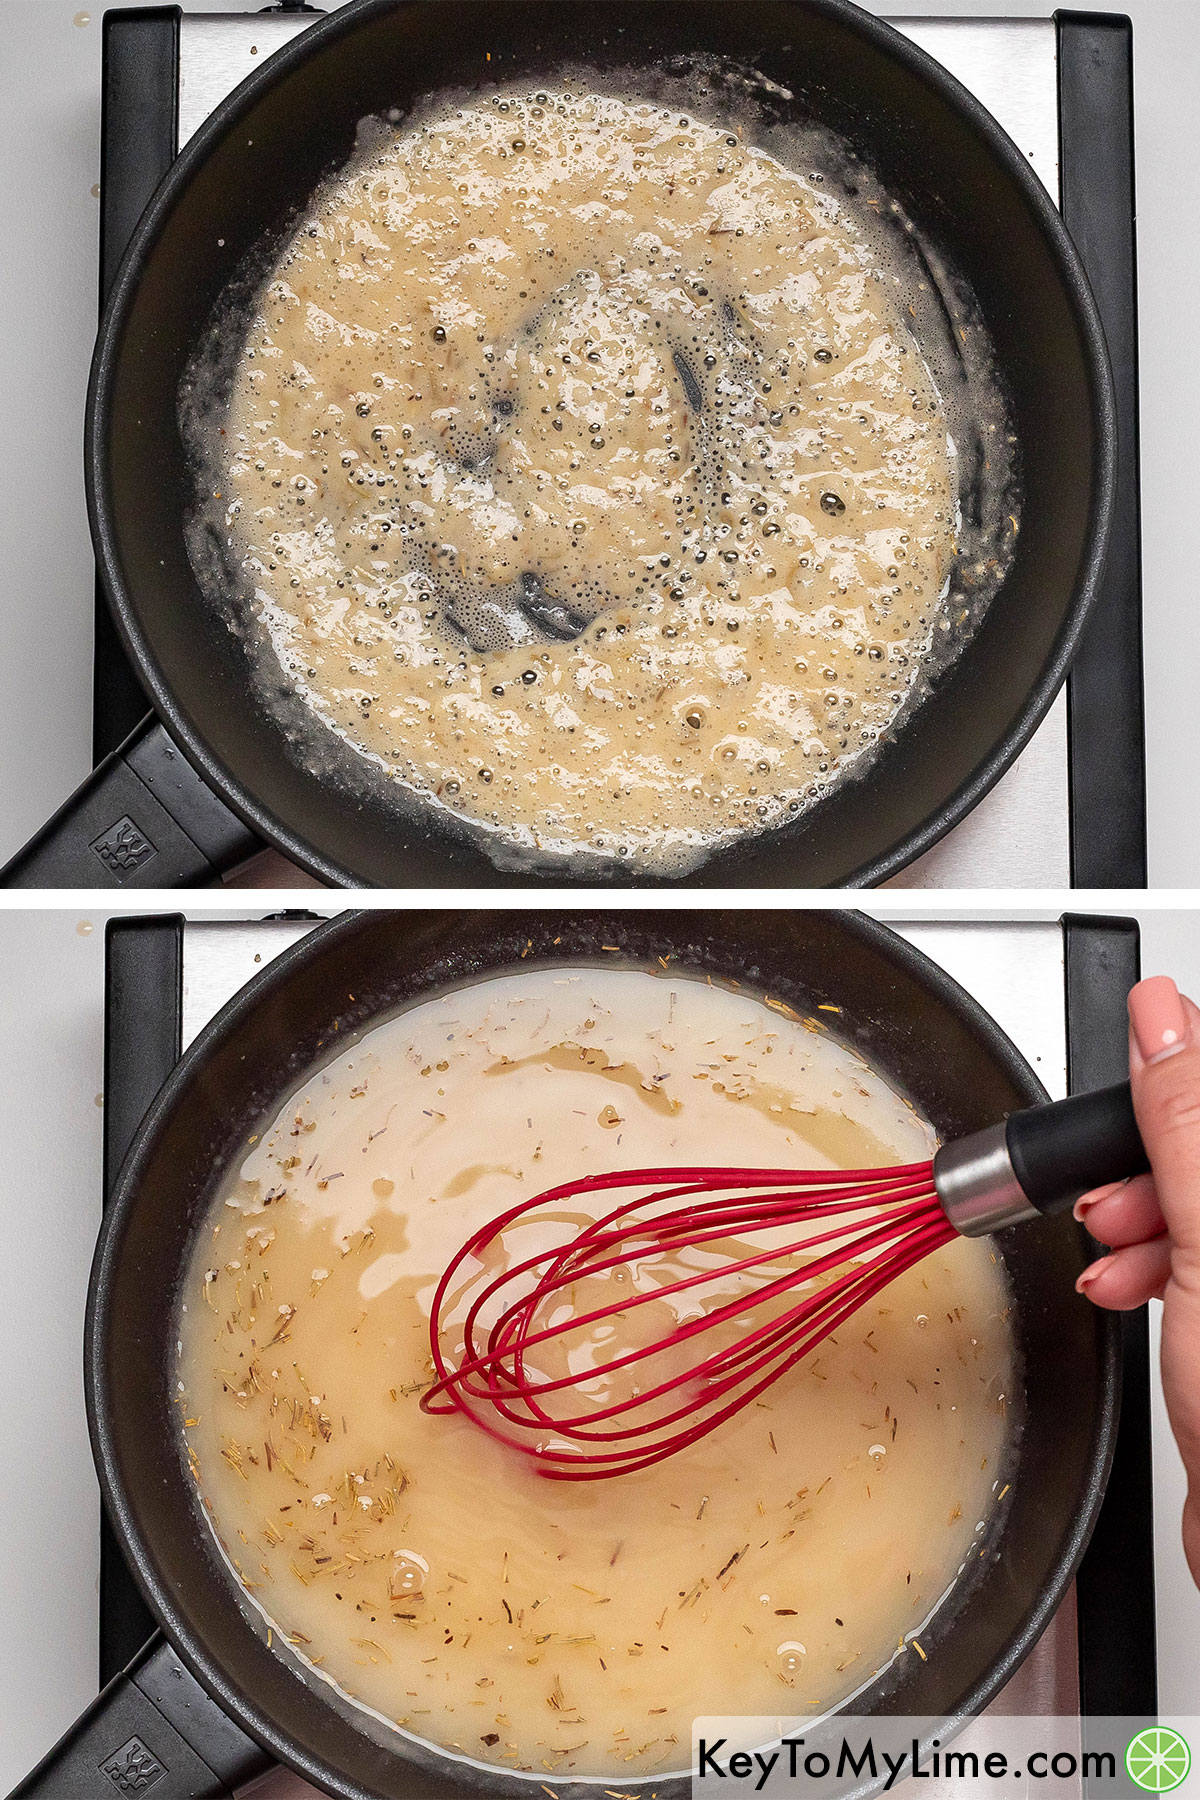 Mixing the flour into the butter and garlic mixture to form a roux, and then whisking in broth and simmering to thicken.